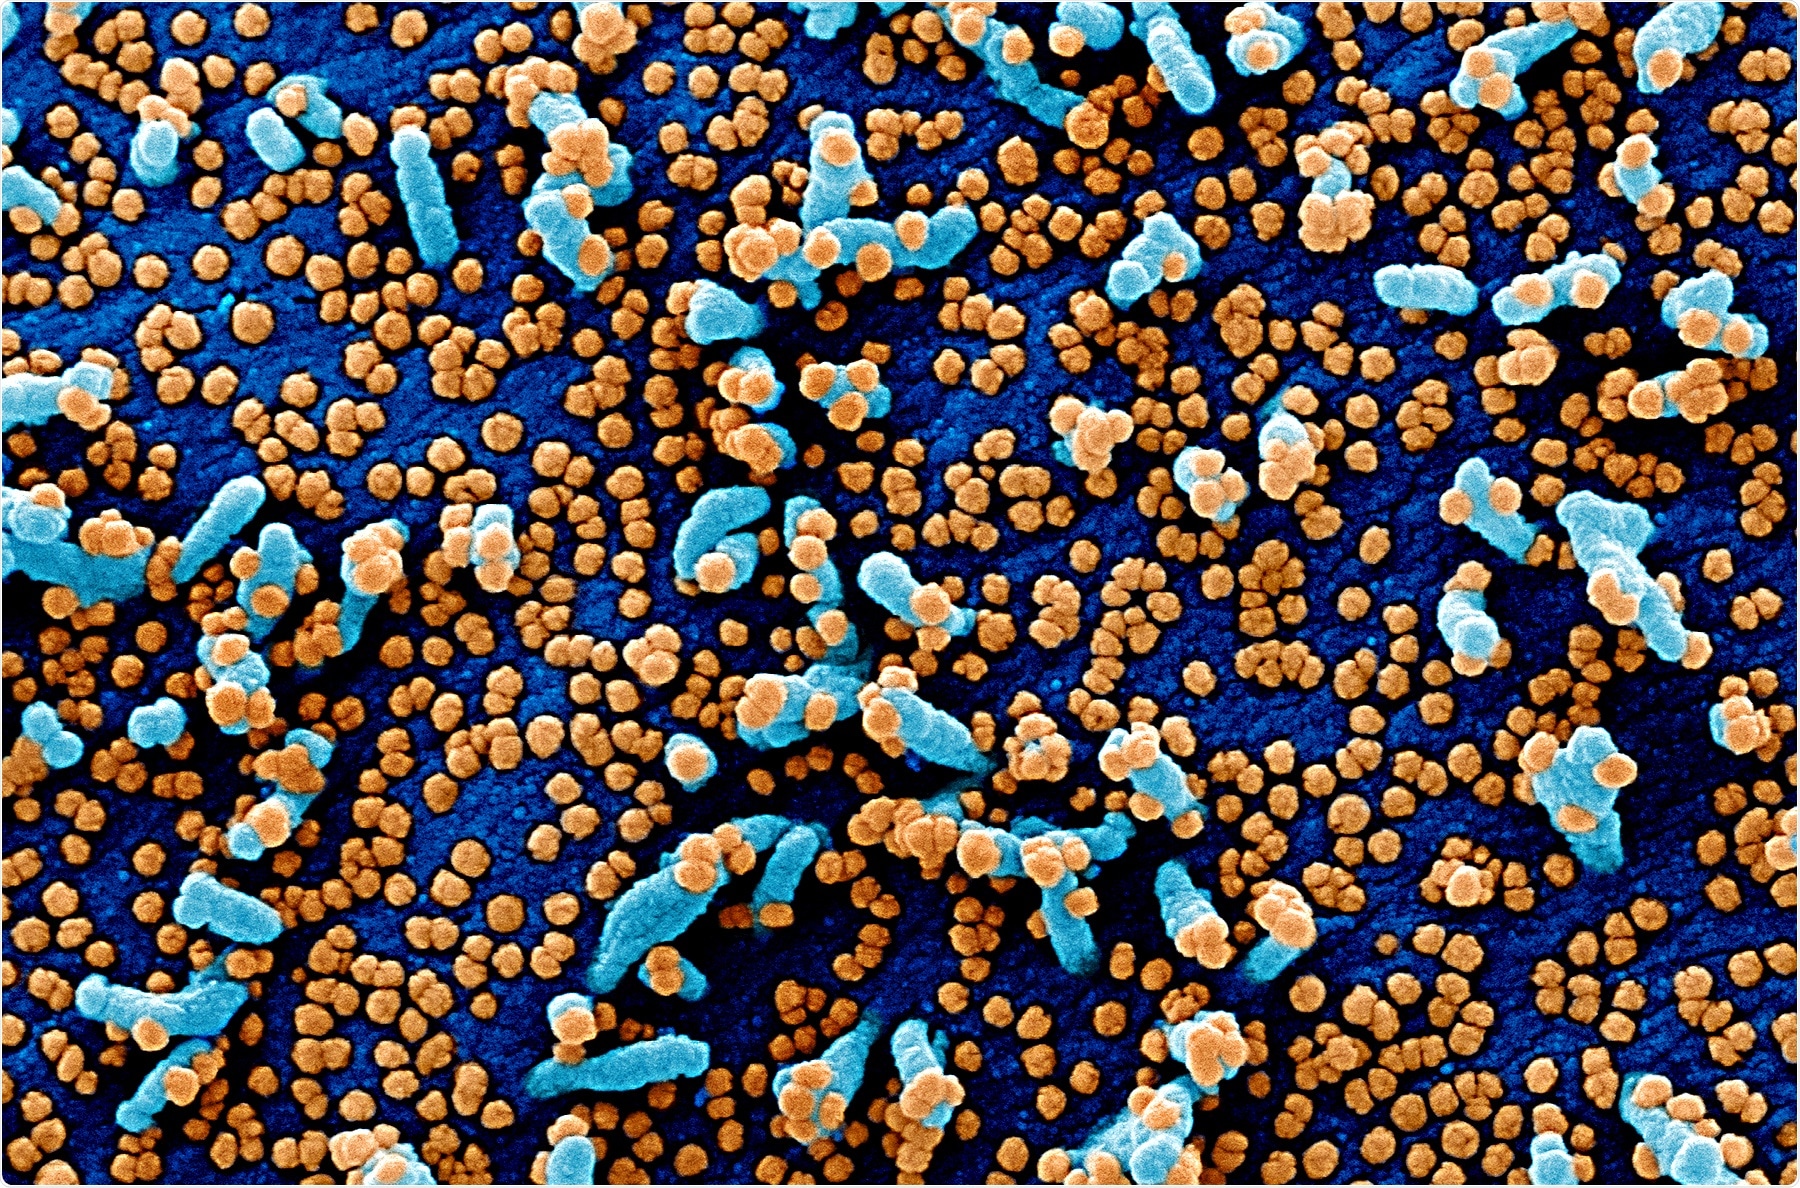 Colorized scanning electron micrograph of a VERO E6 cell (blue) heavily infected with SARS-COV-2 virus particles (orange), isolated from a patient sample. Image captured and color-enhanced at the NIAID Integrated Research Facility (IRF) in Fort Detrick, Maryland. Credit: NIAID